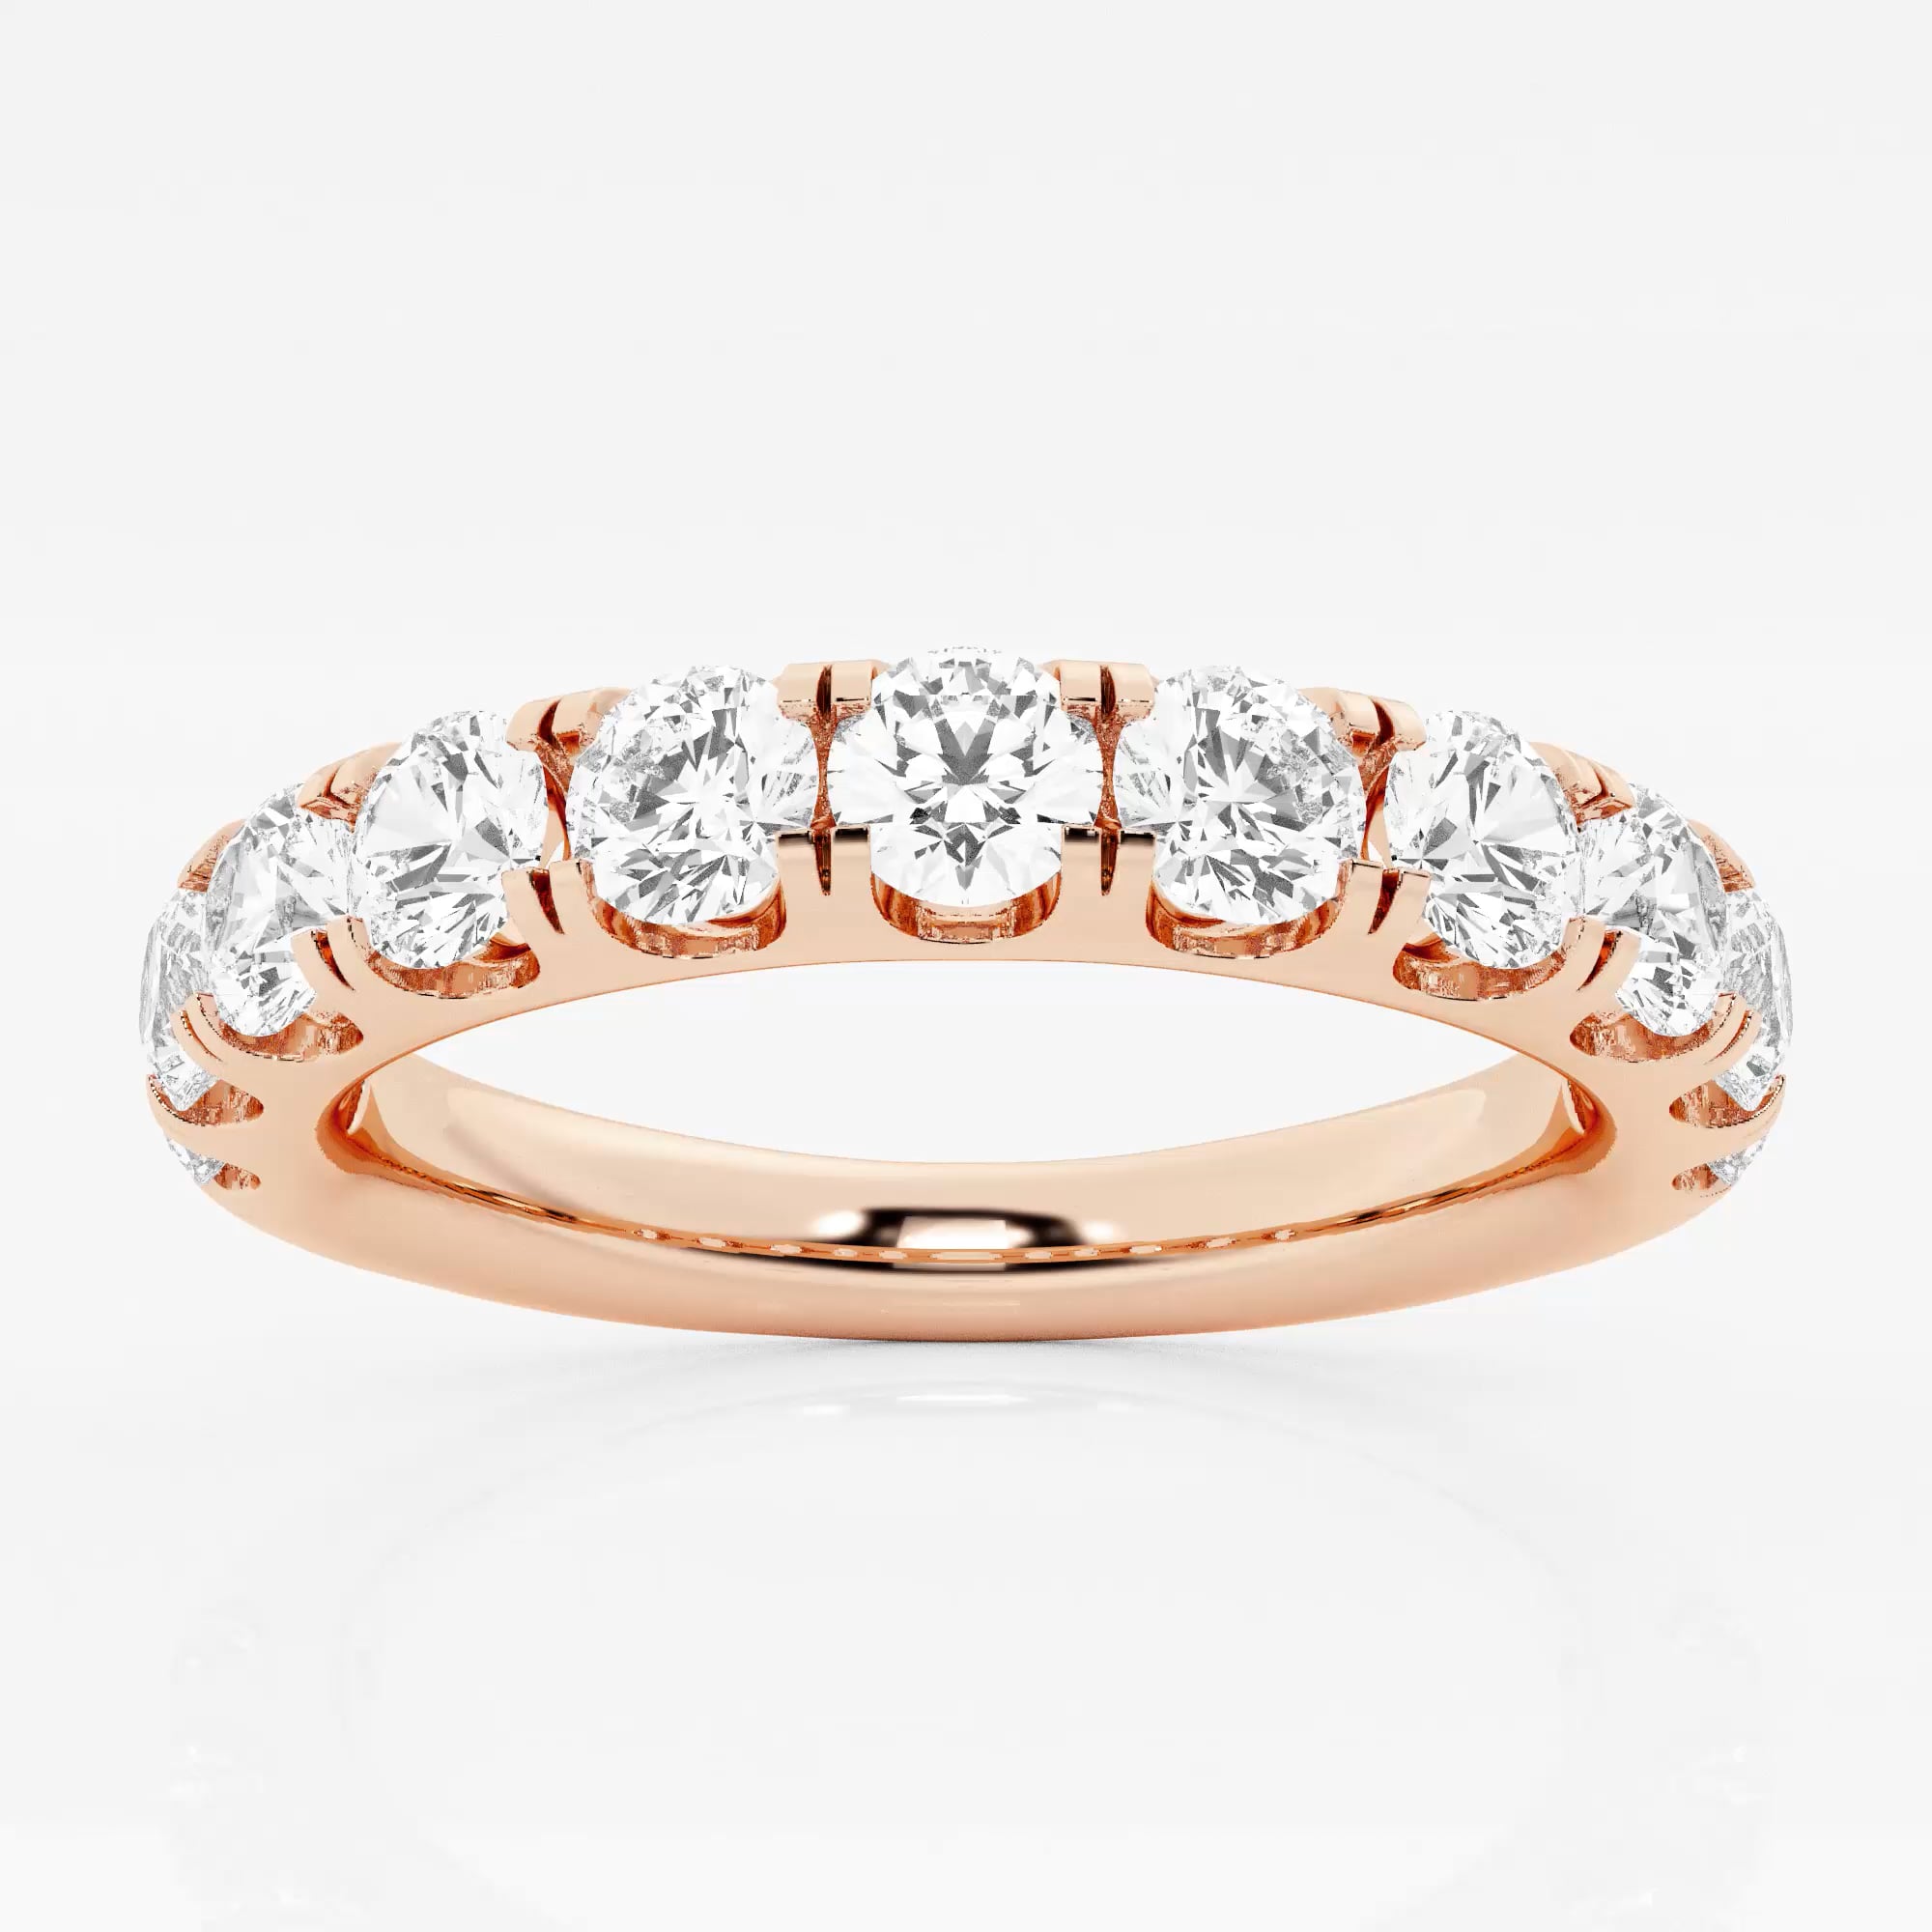 product video for 1 1/2 ctw Round Lab Grown Diamond Eleven-Stone Wedding Band